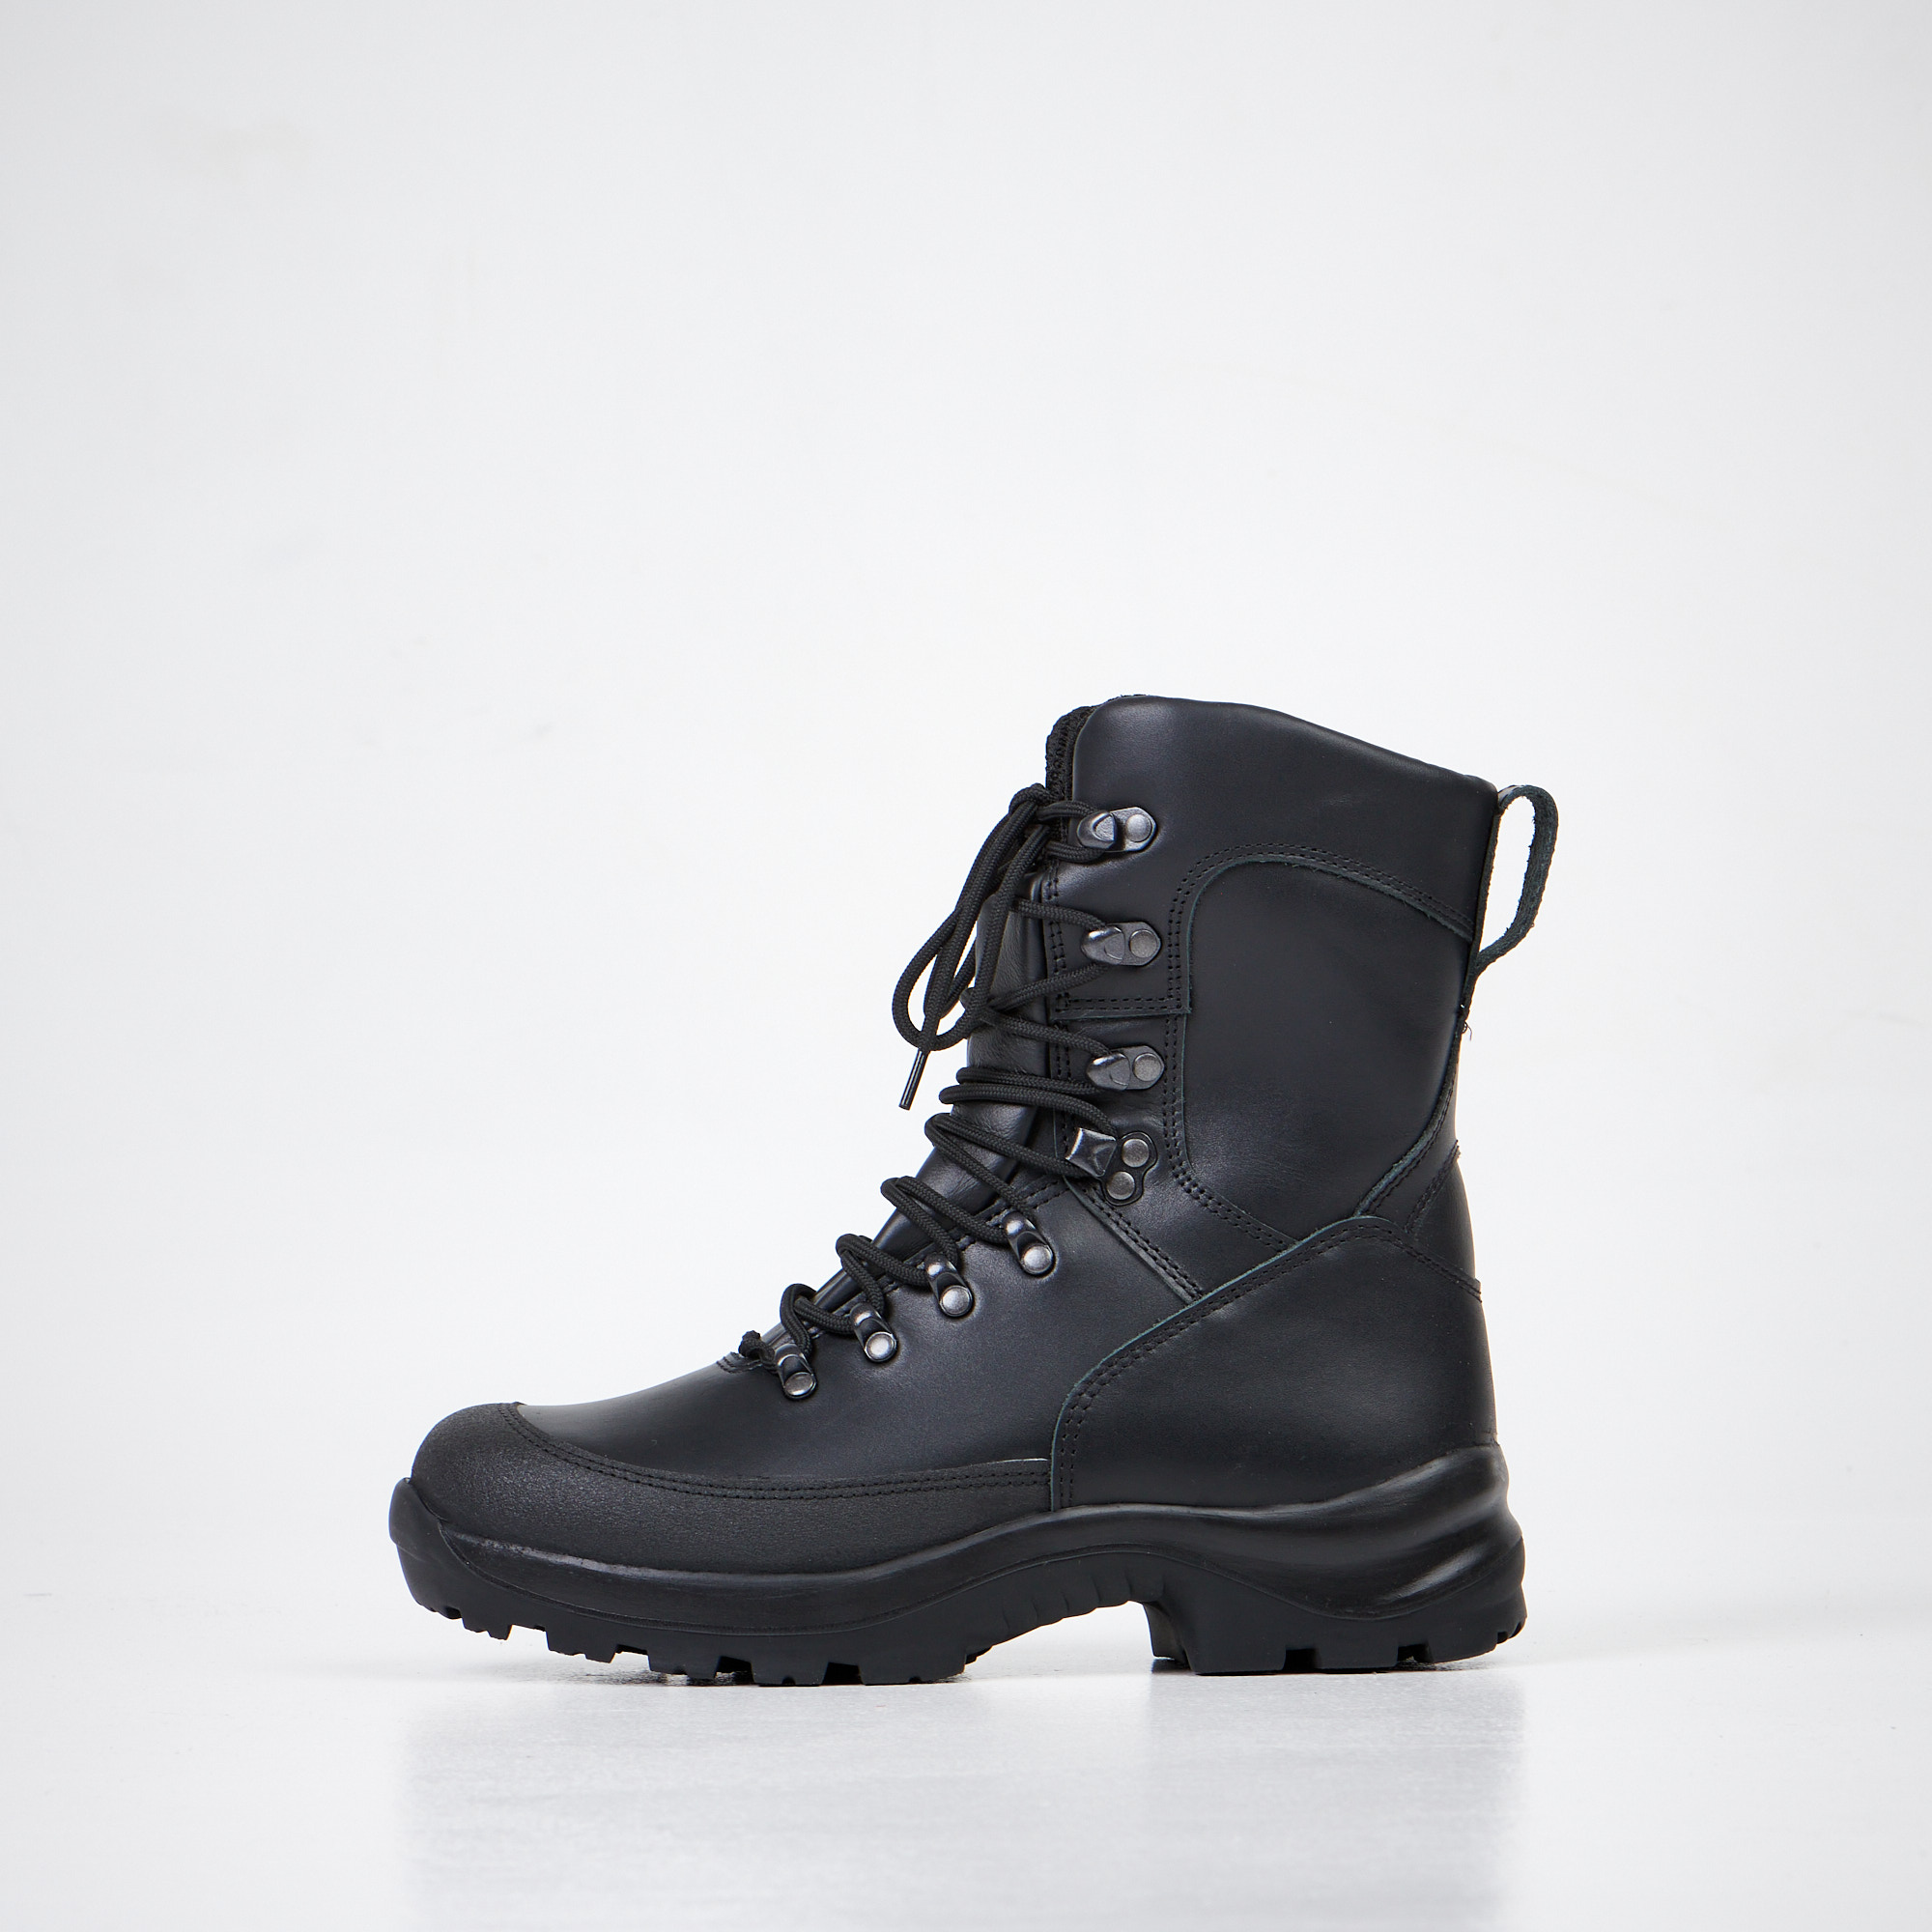 Waterproof Combat Boots with Toe Protector 734 | Hertwill